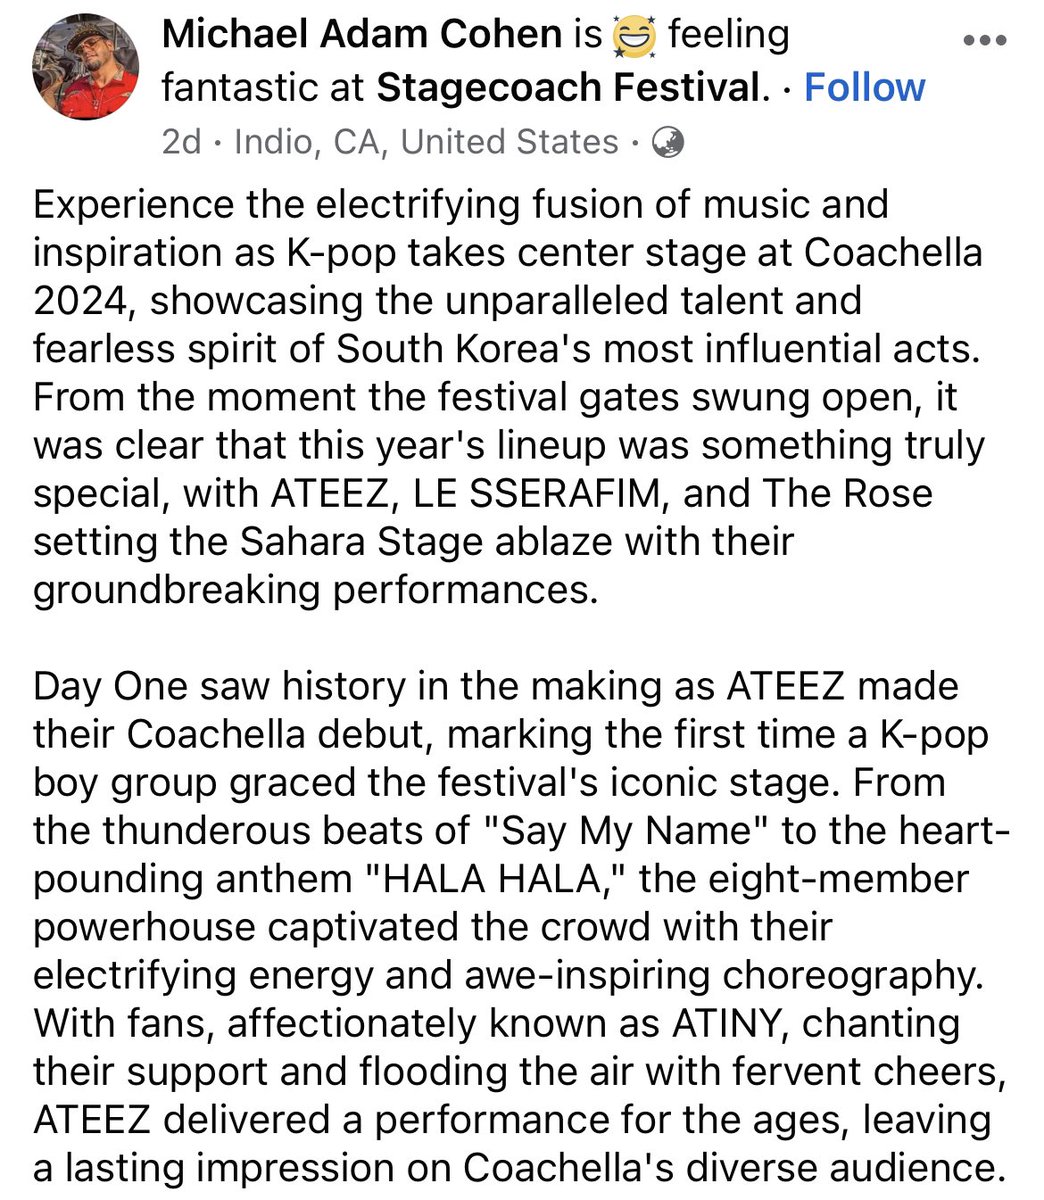 #Repost Michael Adam Cohen FB

“Day One saw history in the making as ATEEZ made their Coachella debut, marking the first time a K-pop boy group graced the festival's iconic stage.”

#CHELLATEEZ #ATEEZatCOACHELLA #ATEEZ #Coachella #에이티즈 #エイティーズ #Coachella2024